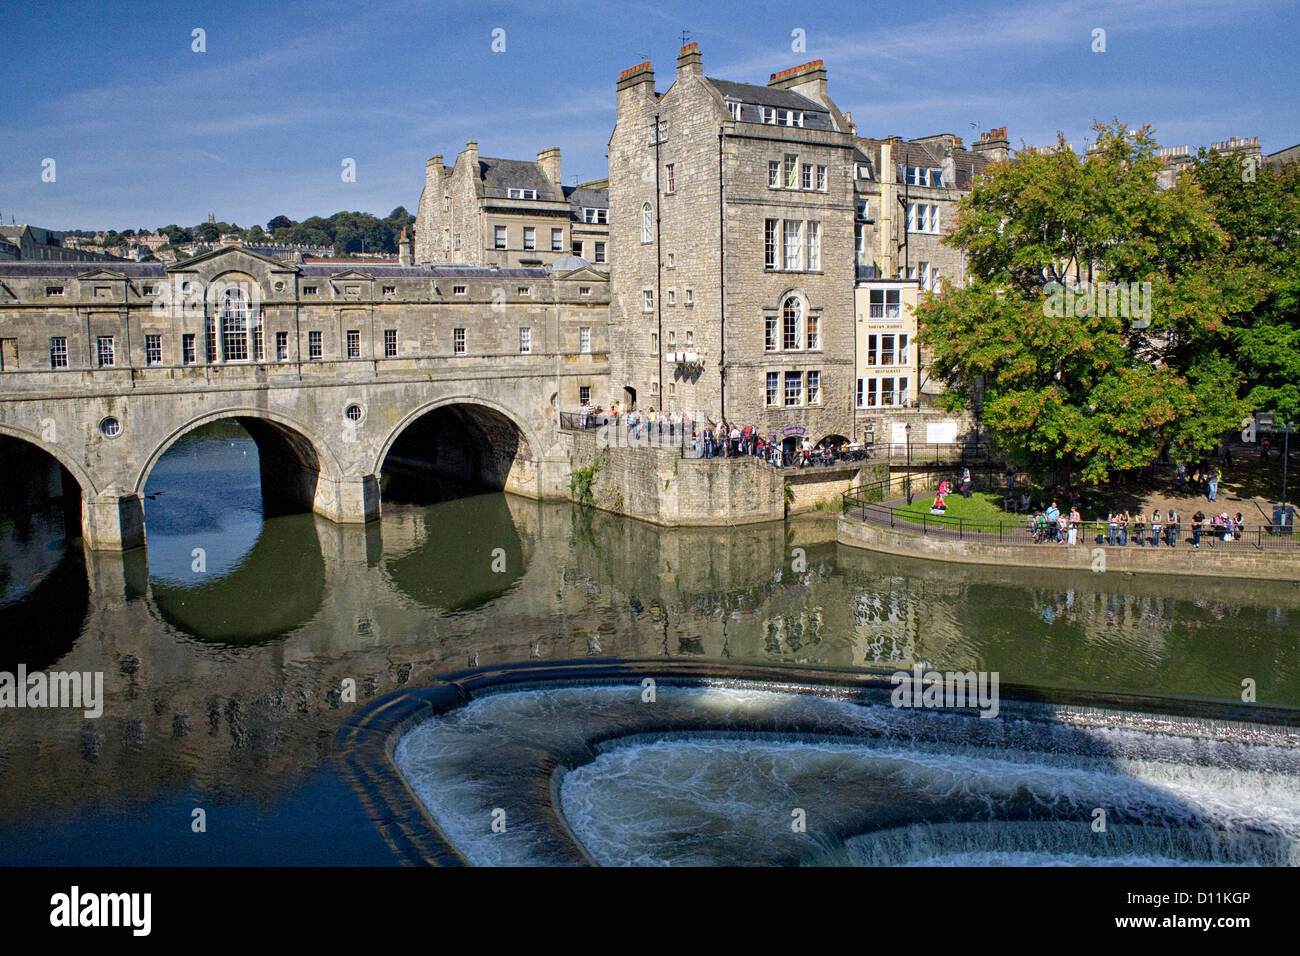 Pulteney Bridge over the River Avon, Bath England. A place for picnics and shopping for tourists visiting the city. Stock Photo